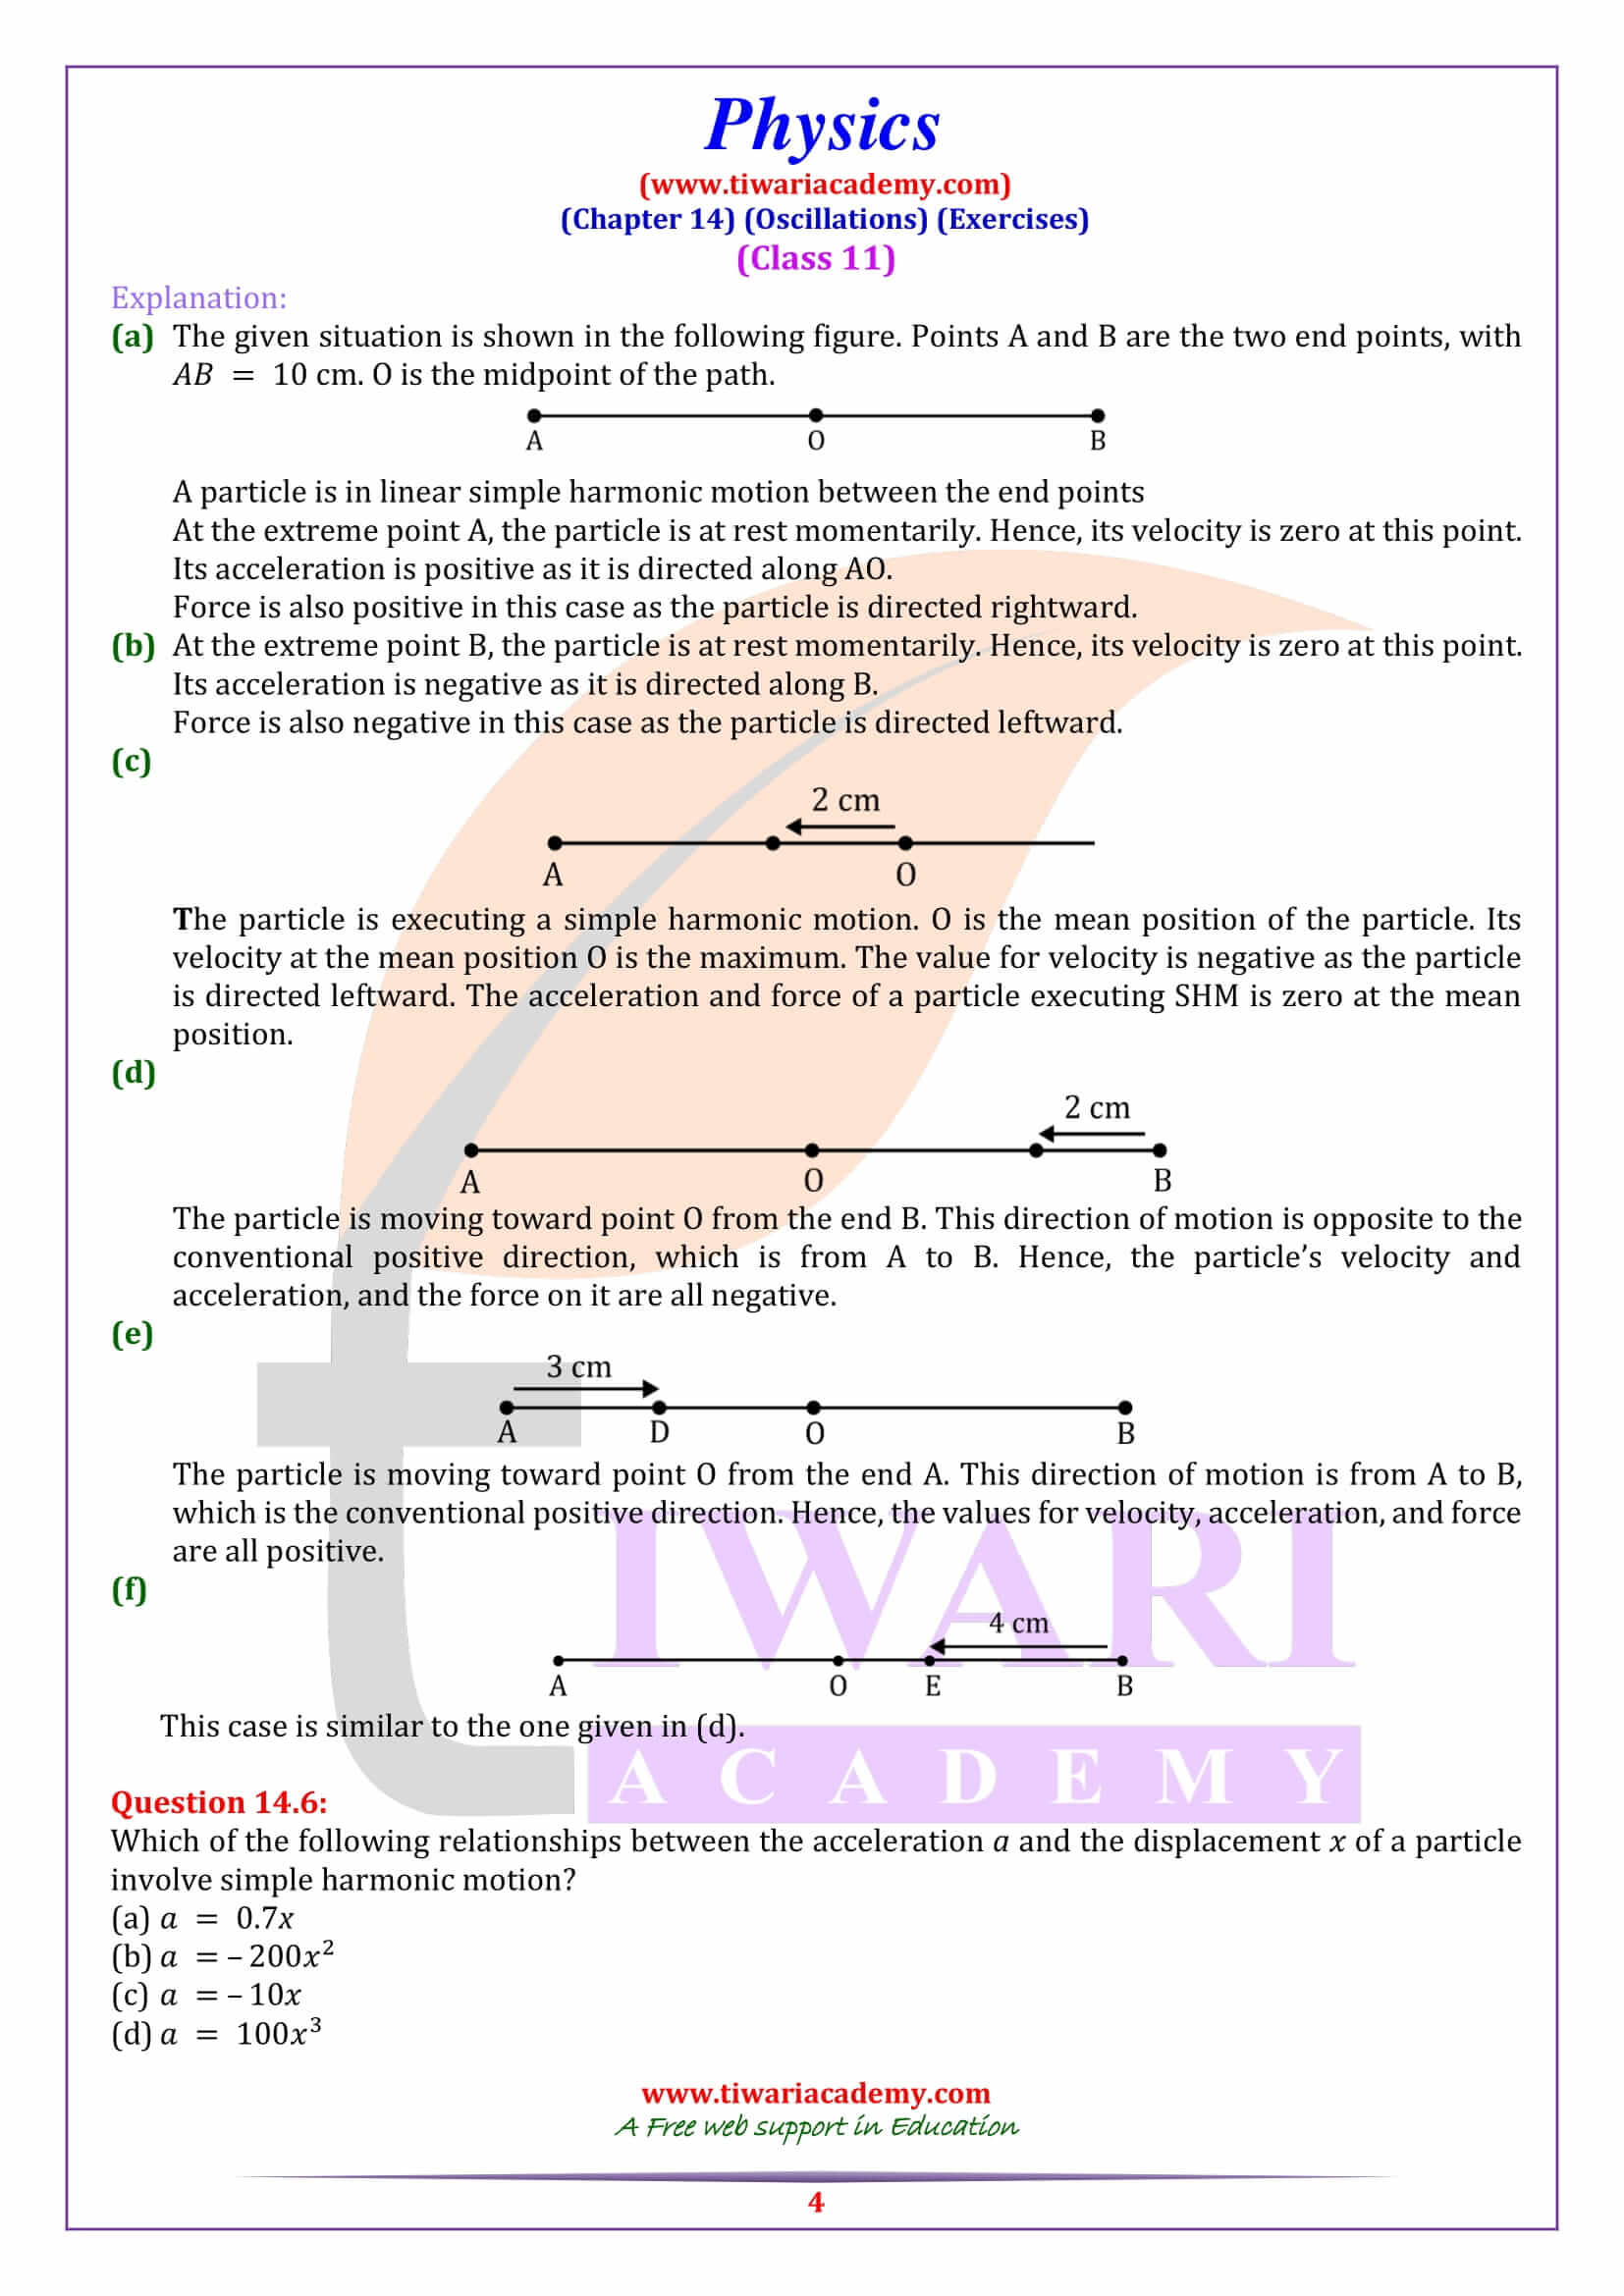 NCERT Solutions for Class 11 Physics Chapter 14 in English Medium